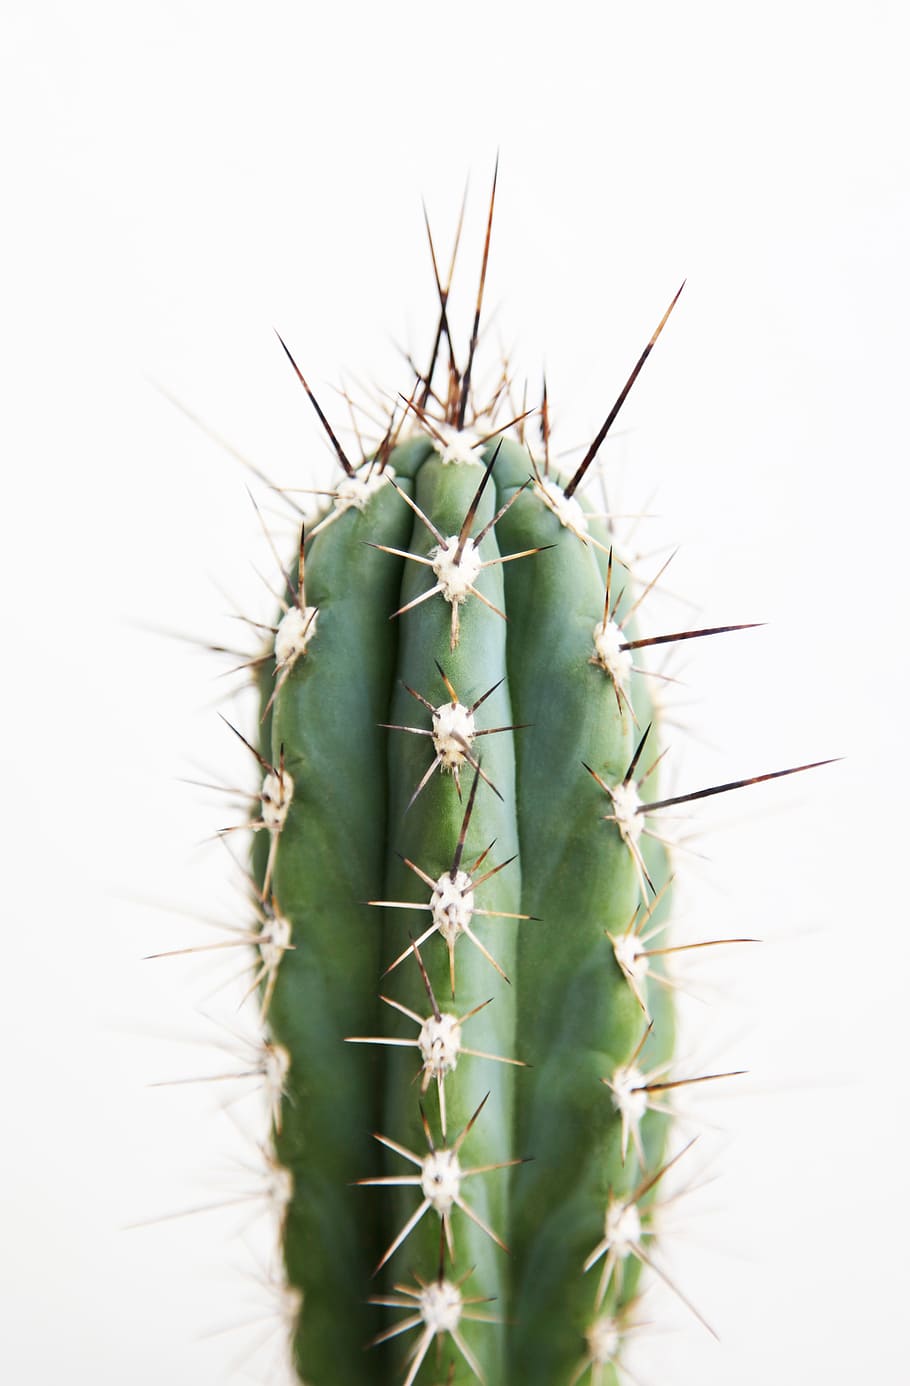 one, cactus, cacti, desert, green, plant, thorns, spines, macro, graphy